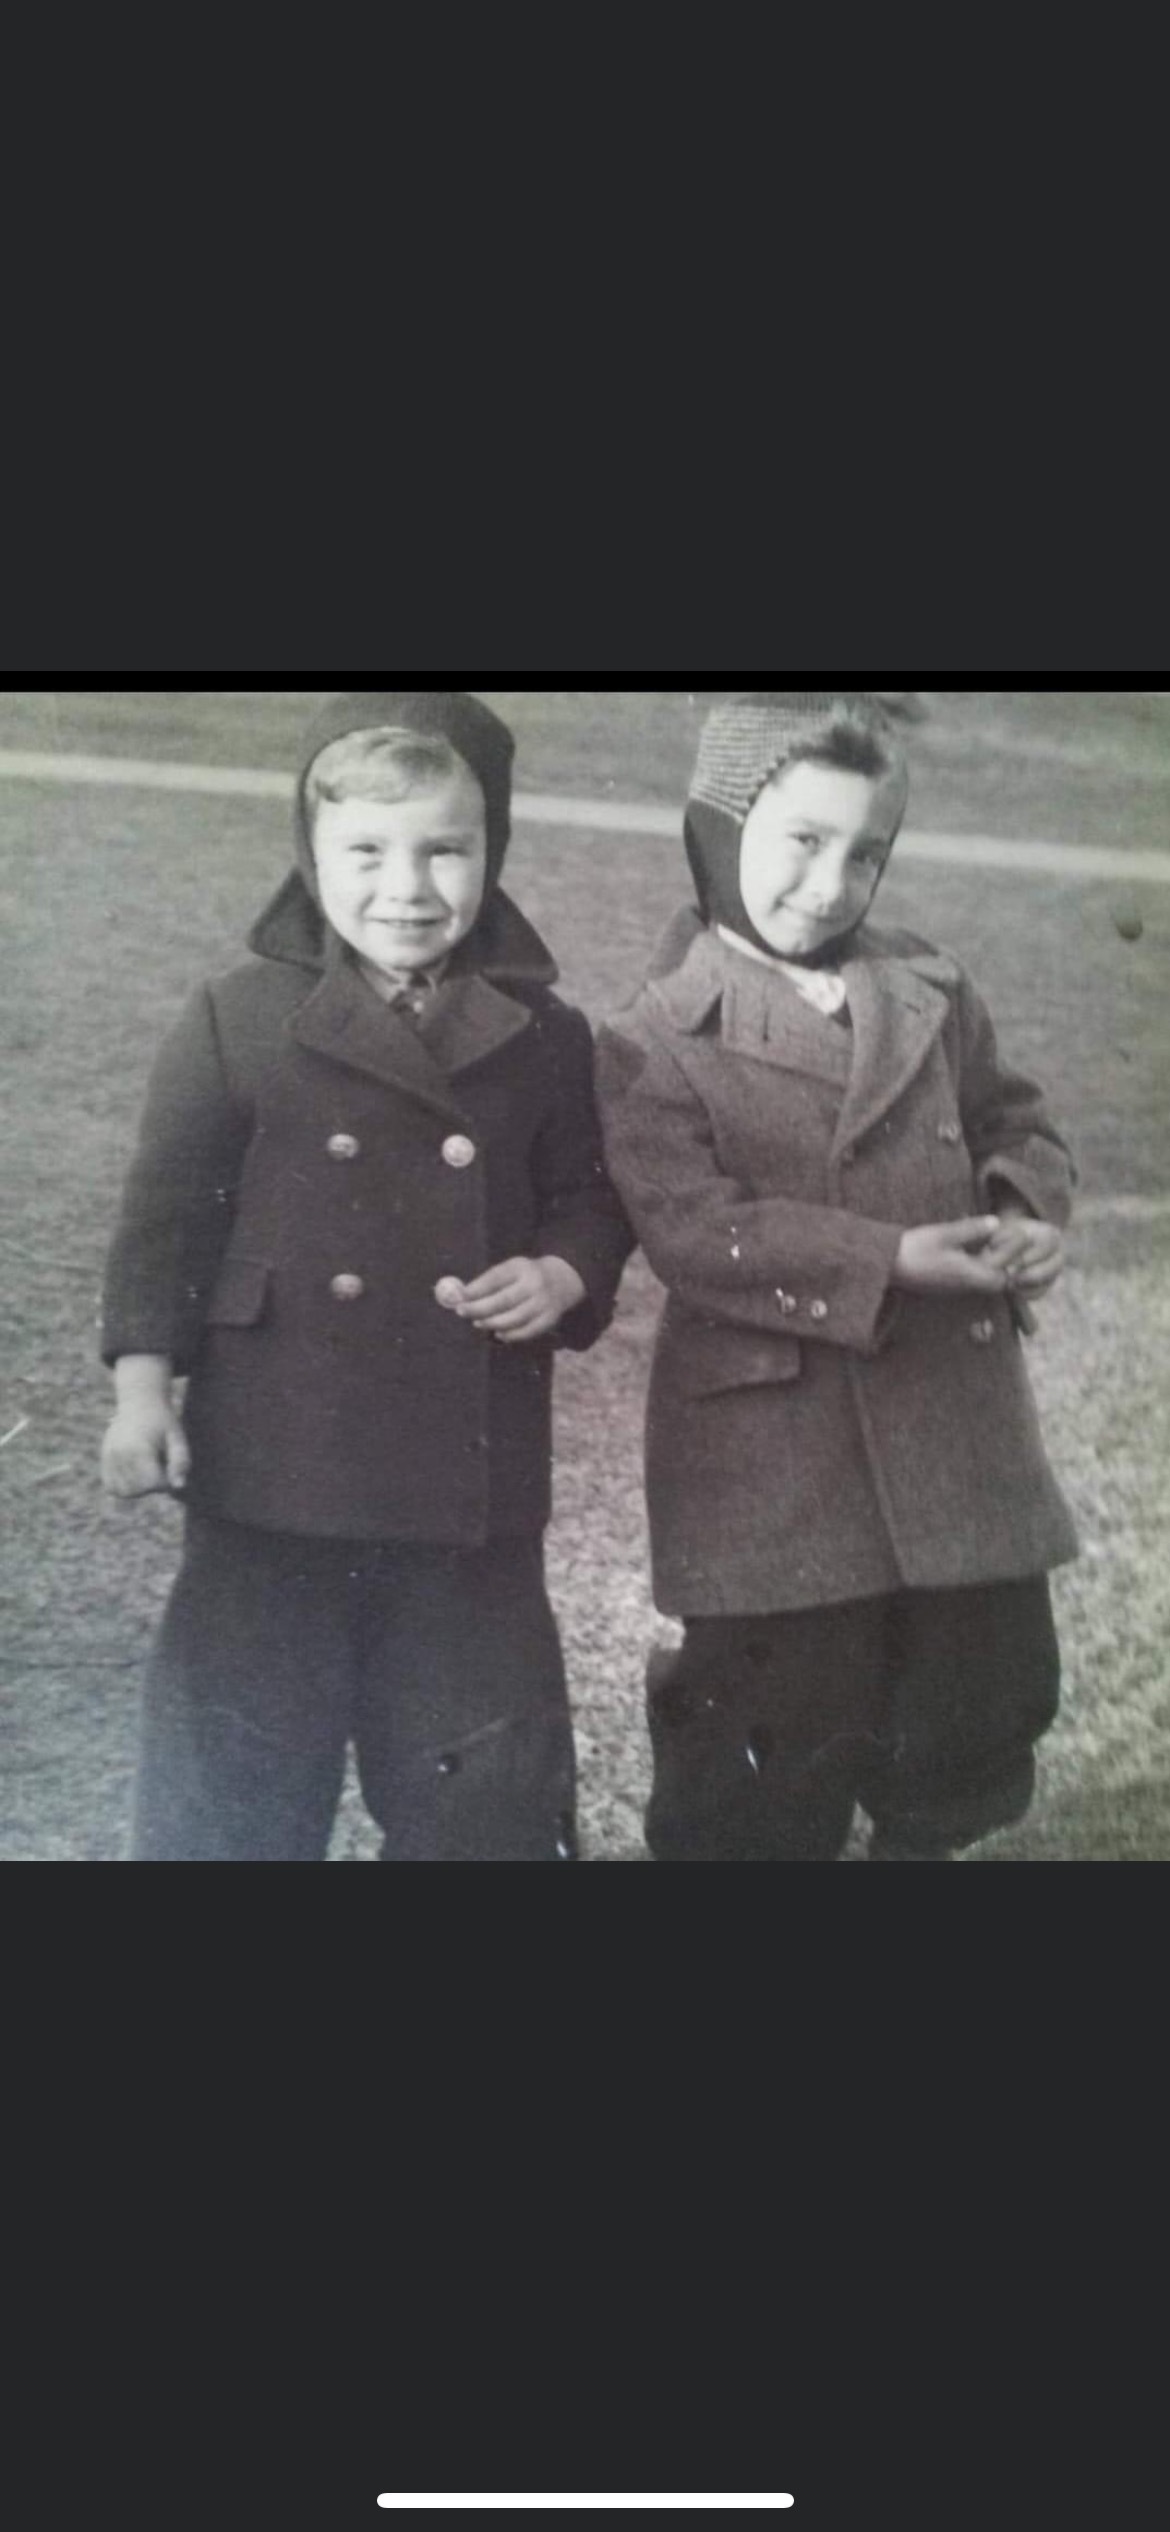 Billy DePetris, right, with his brother Rick when they were young children. COURSTESY DEPETRIS FAMILY